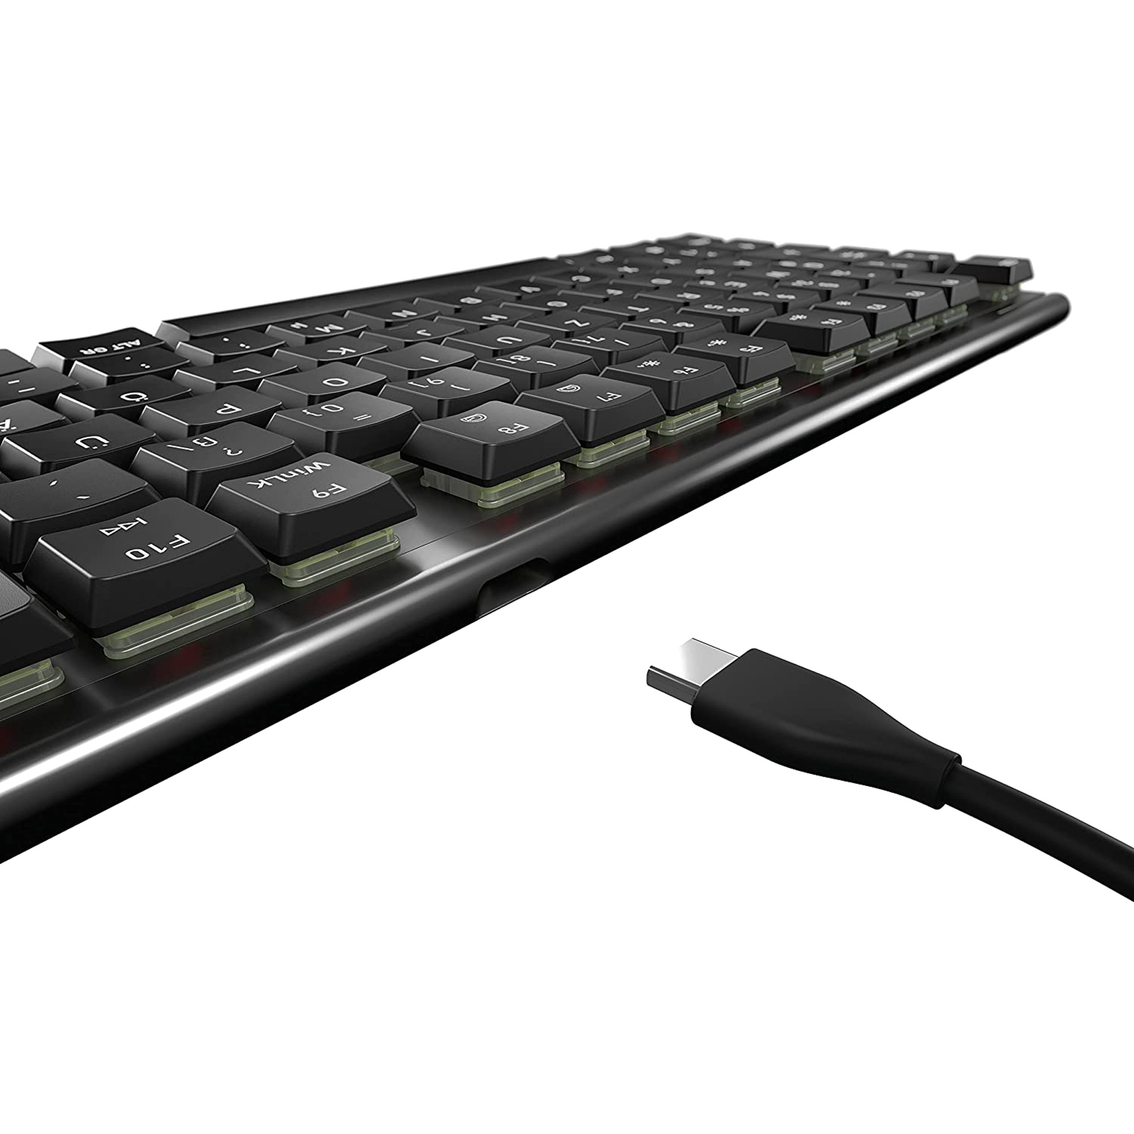 Cherry Mechanical MX Low Profile Keyboard with RGB Lighting and Metal Housing - Image 4 of 6